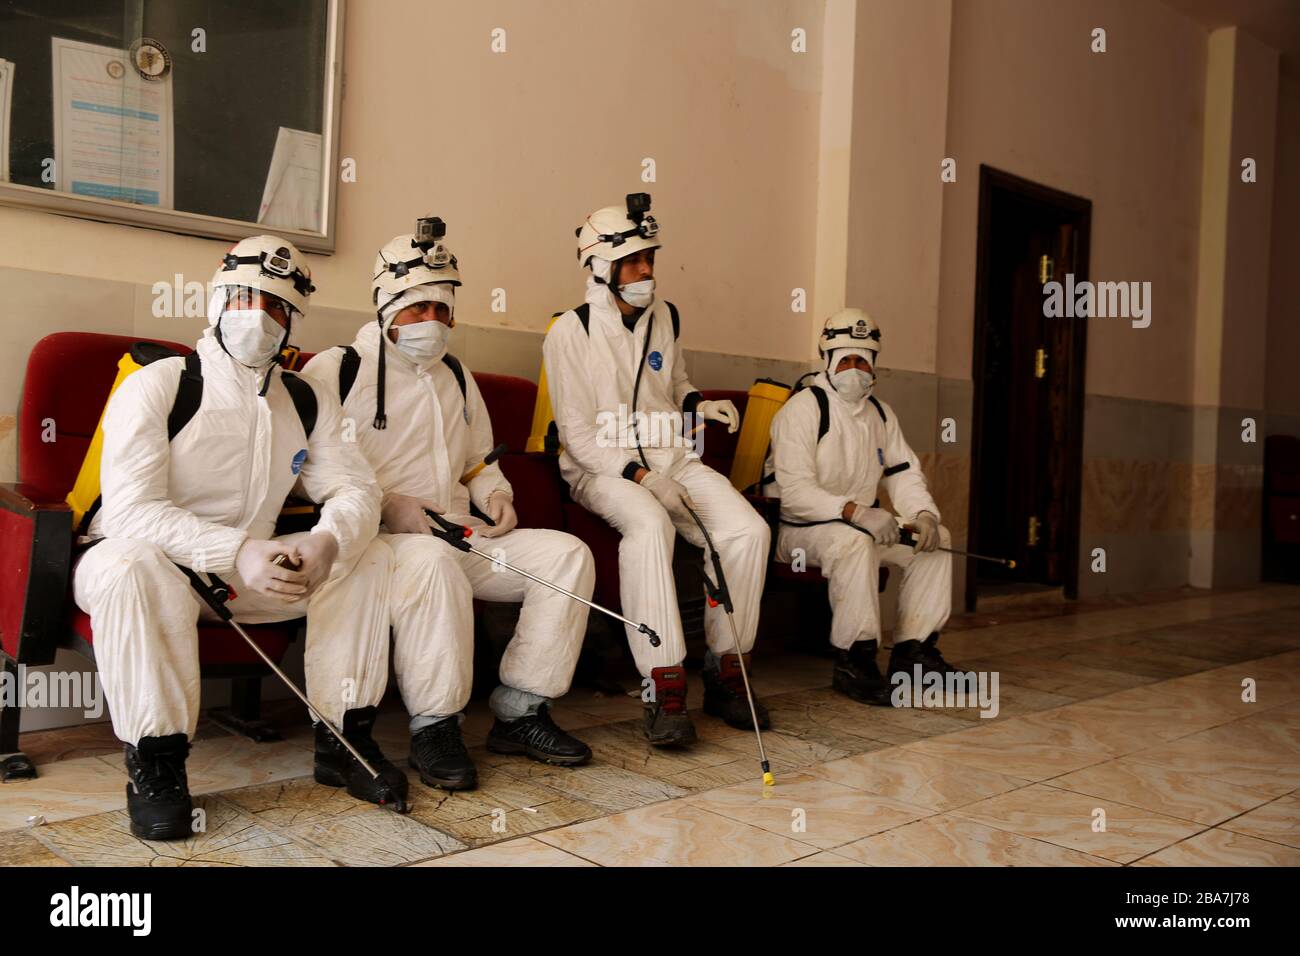 March 24, 2020: Aleppo, Syria. 24 March 2020. Members of the Syrian Civil Defence clad in protective gear spray with disinfectant the premises of a medical clinic in the town of Atarib, in the western Aleppo countryside, as part of preventive measures against the spread of the Coronavirus in the area. Although in the rebel-held northwest part of Syria no Covid-19 cases have been confirmed, some preventive measures are now in place to contain a possible epidemic in the warn-torn country. The Syrian government is also applying tight measures after the first case of Covid 19 in the country was an Stock Photo